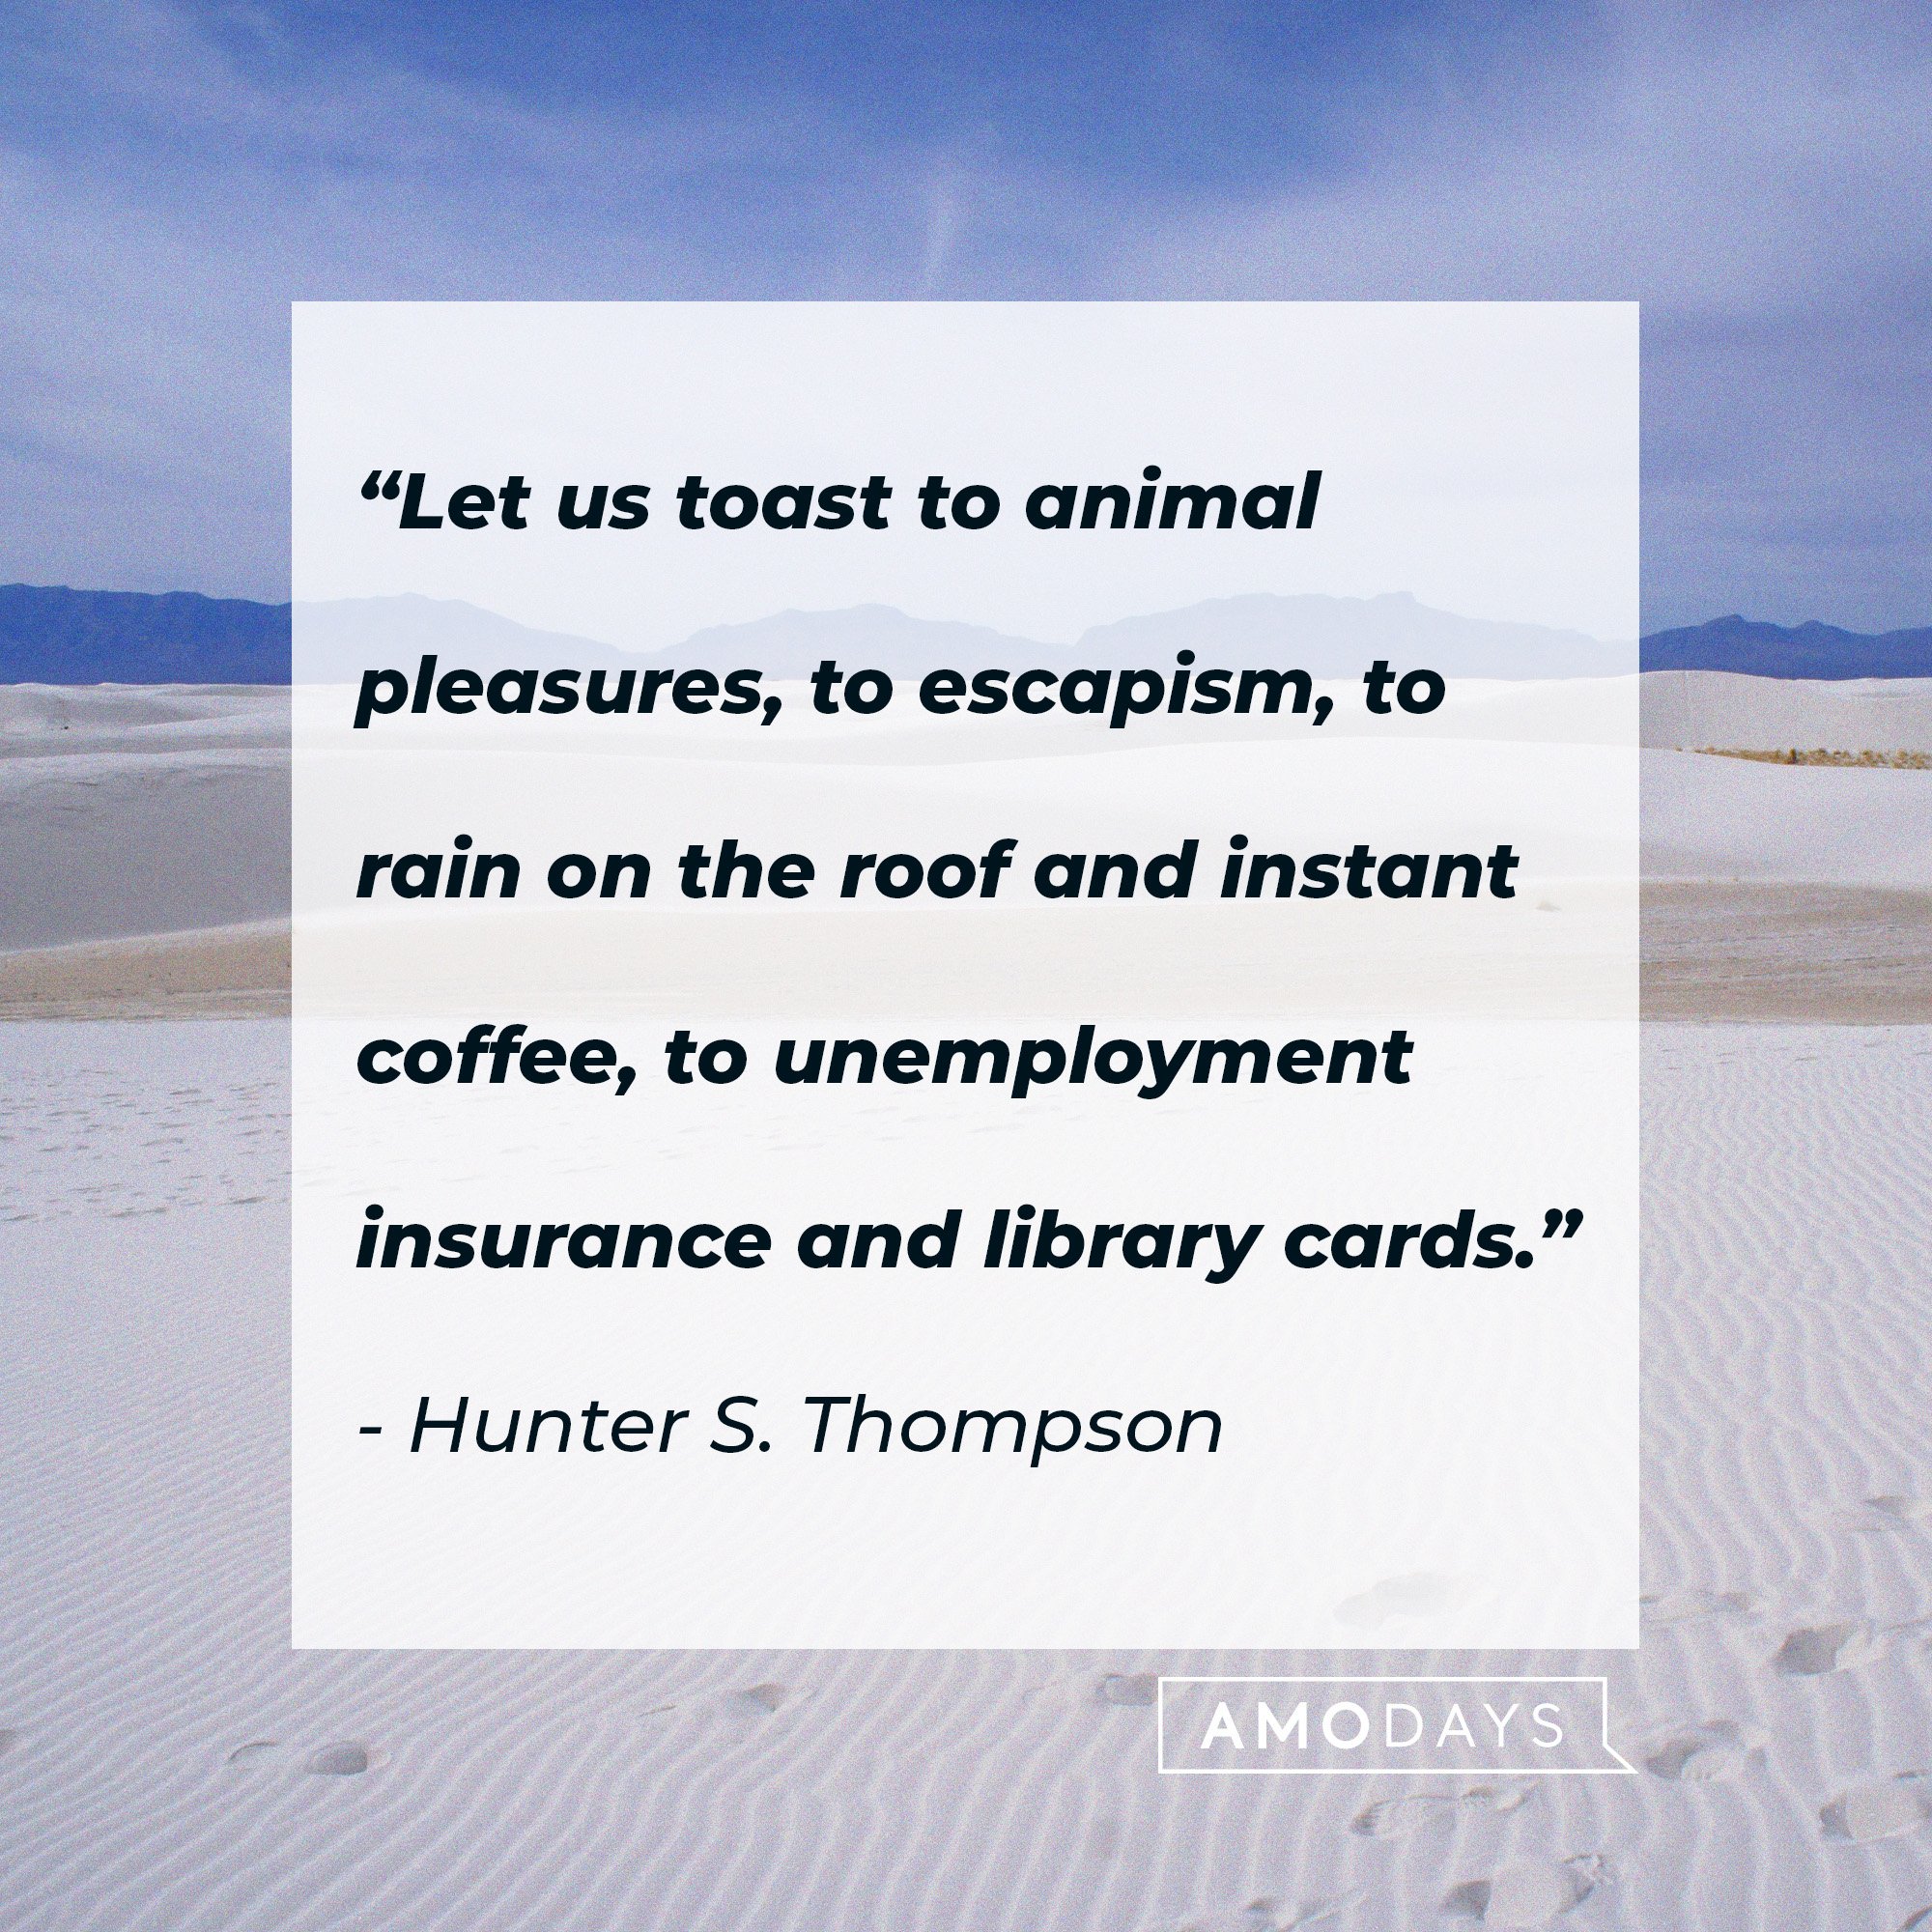 Hunter S. Thompson’s quote: “Let us toast to animal pleasures, to escapism, to rain on the roof and instant coffee, to unemployment insurance and library cards.” | Image: AmoDays